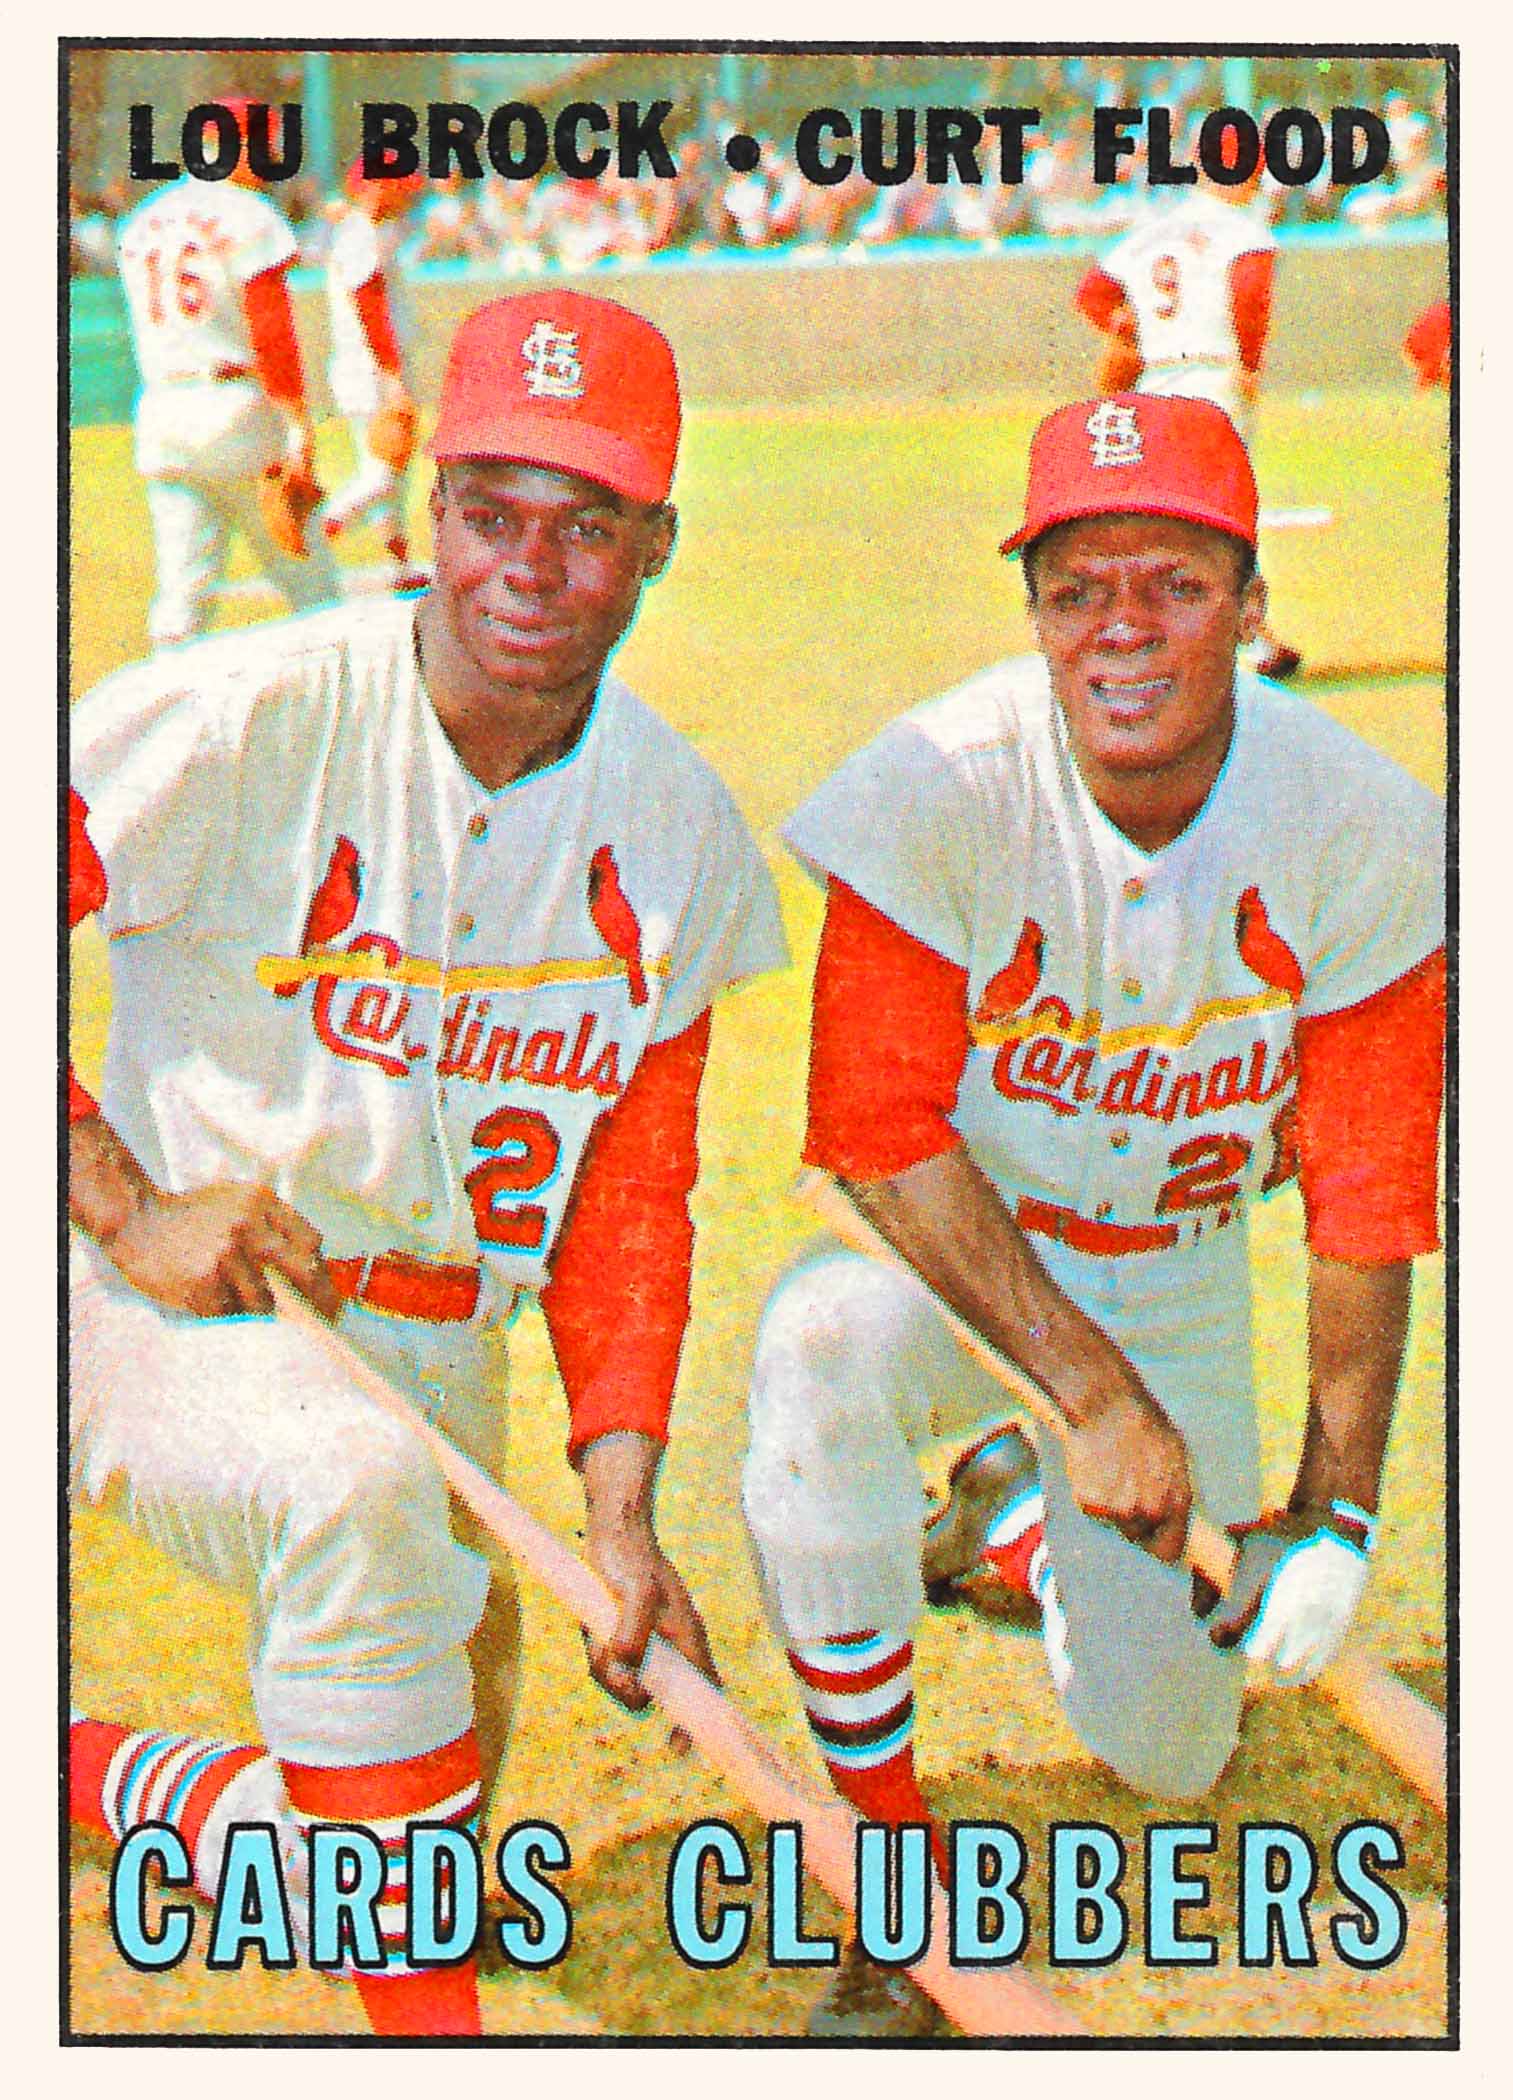 1967 Topps Cards Clubbers